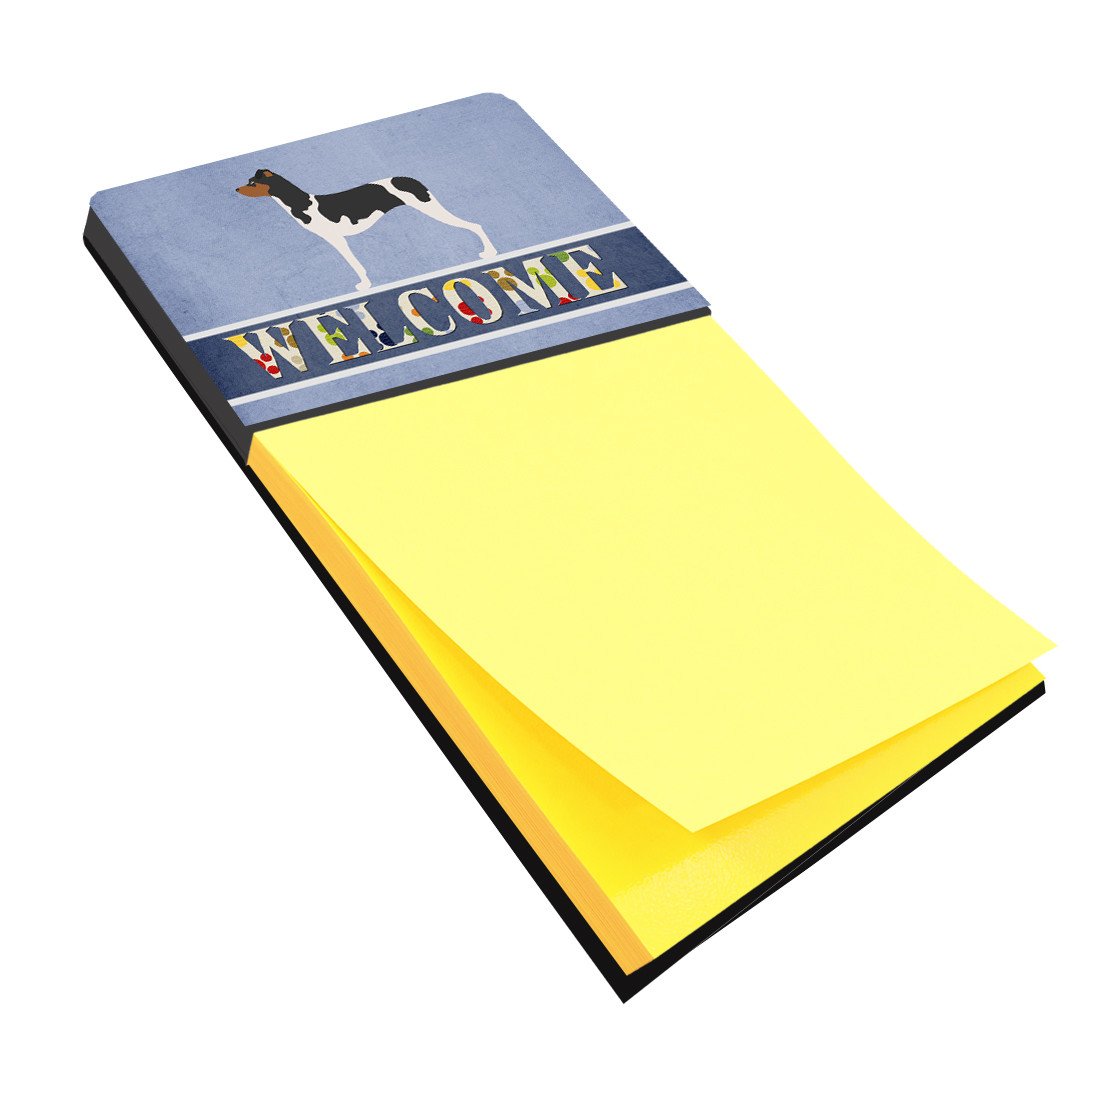 Brazilian Terrier Welcome Sticky Note Holder BB8315SN by Caroline's Treasures